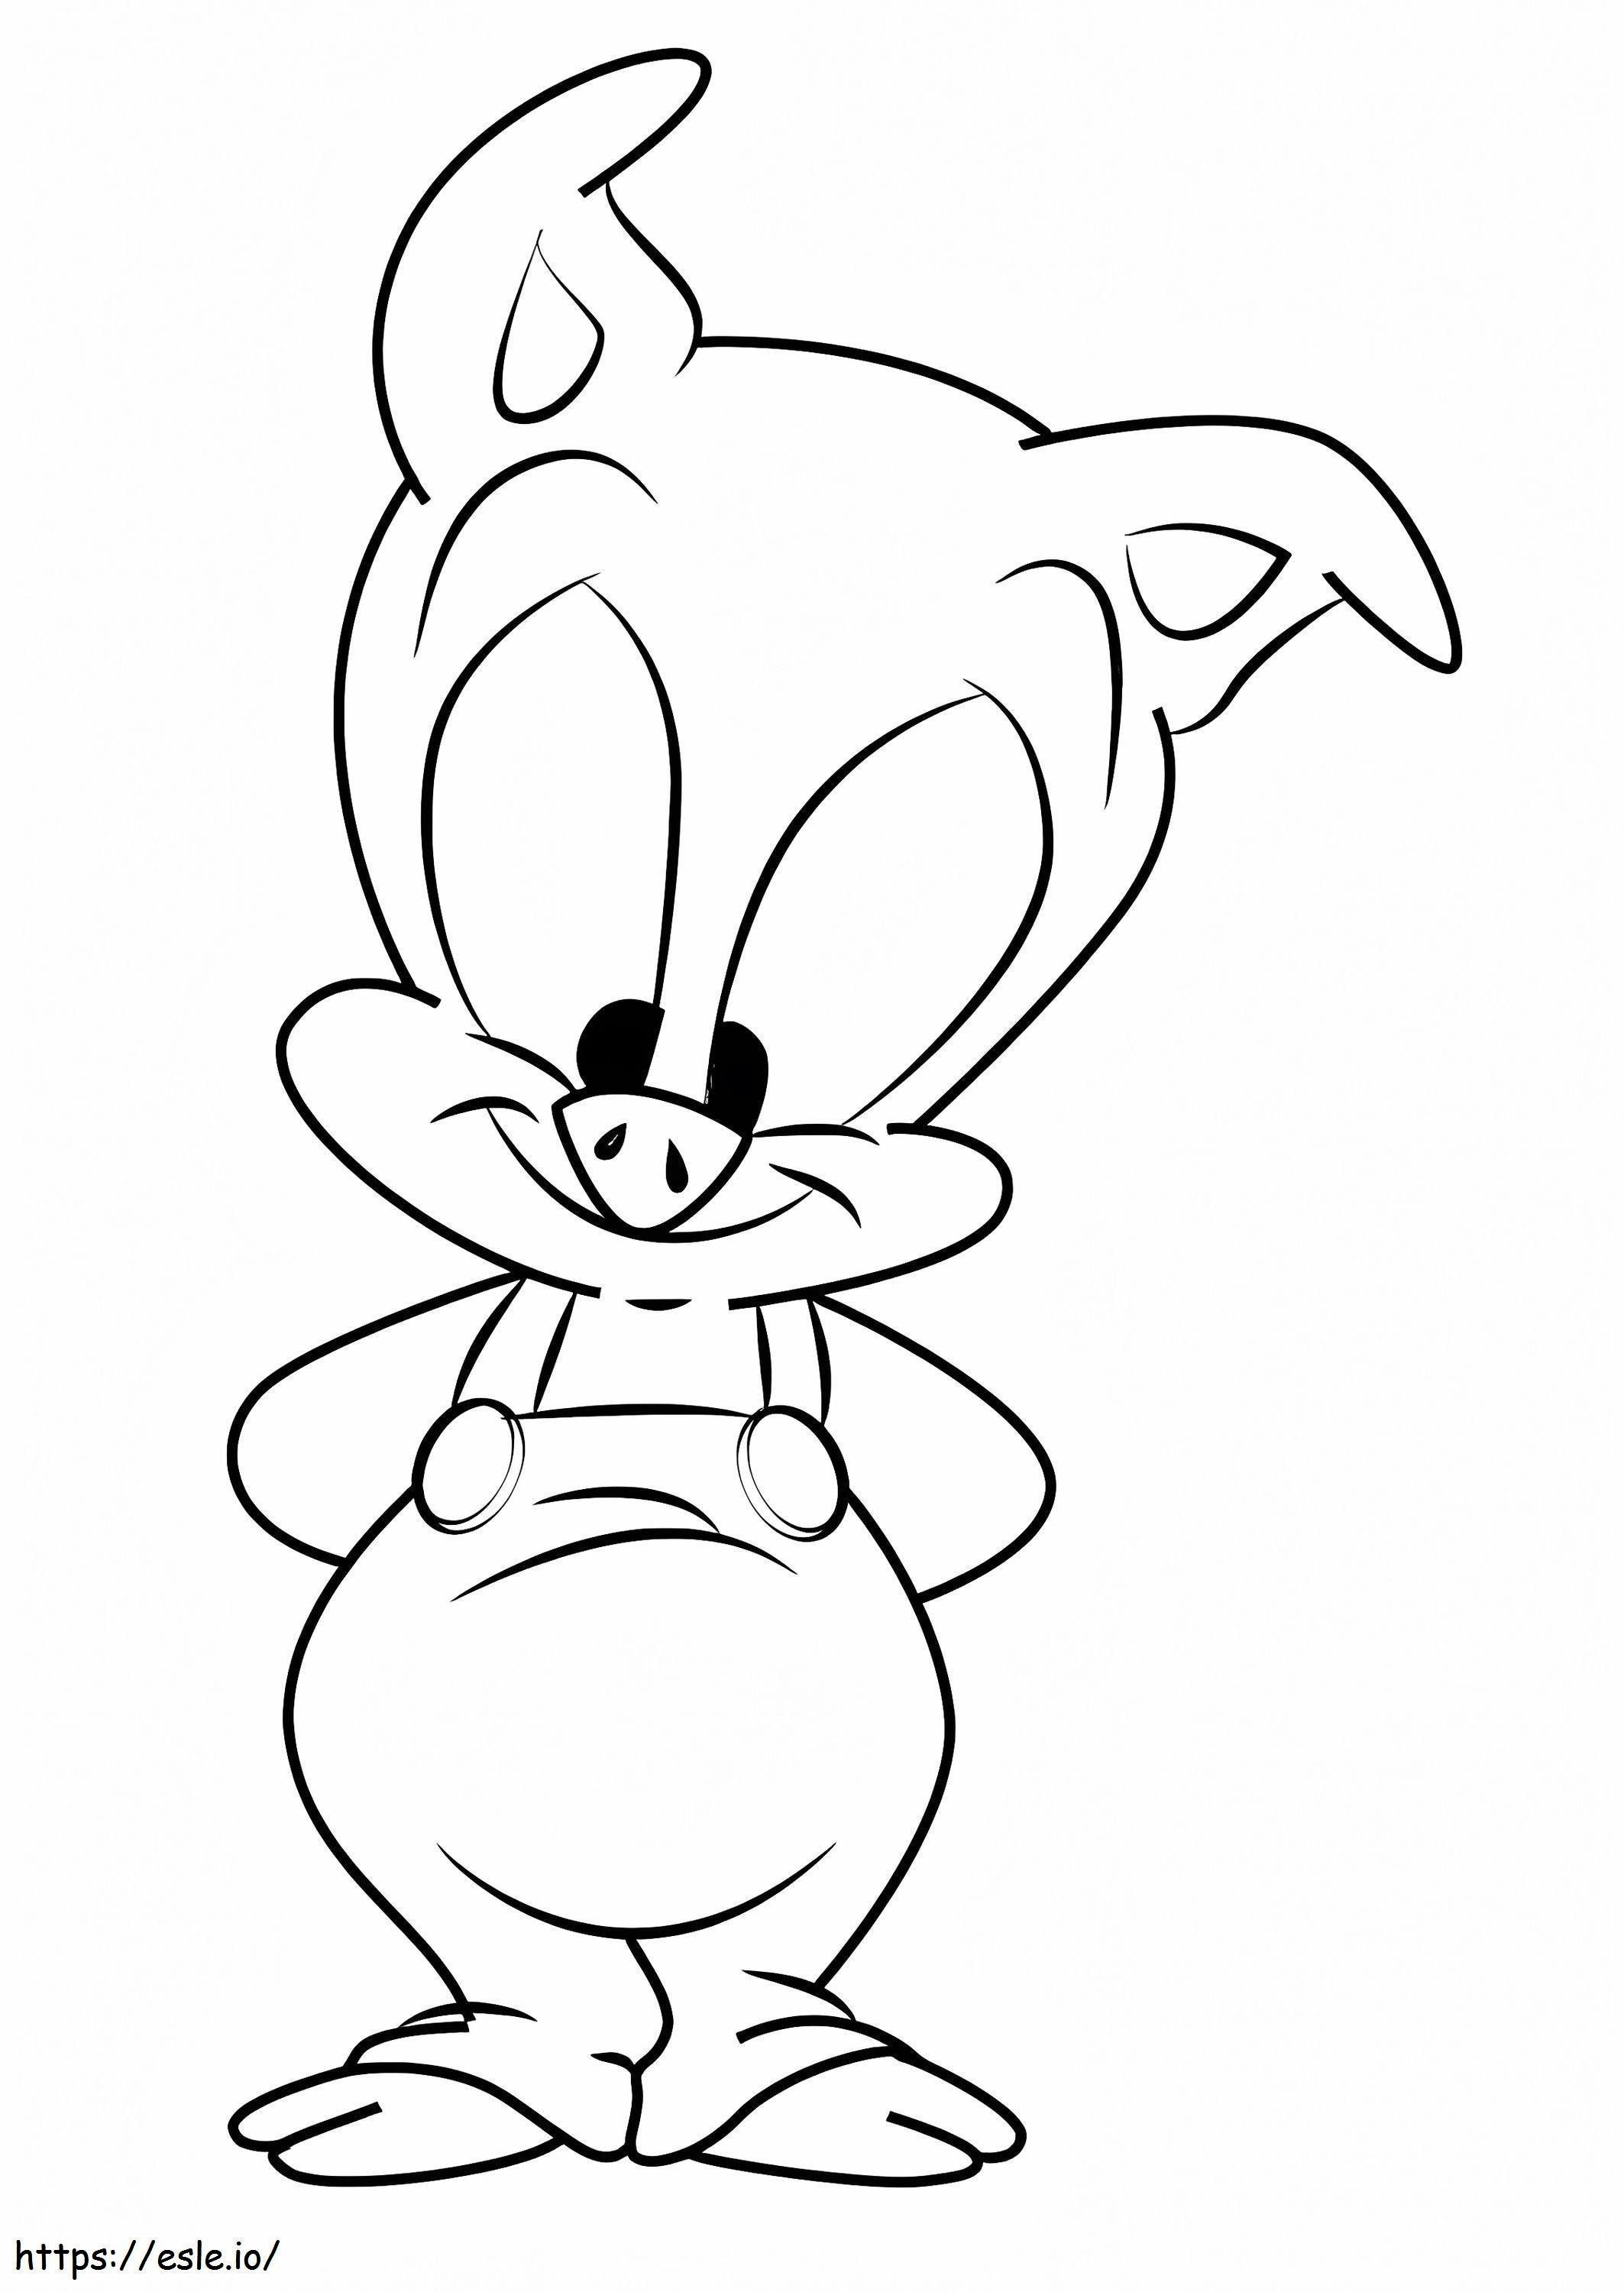 Hamton Pig From Tiny Toon Adventures coloring page